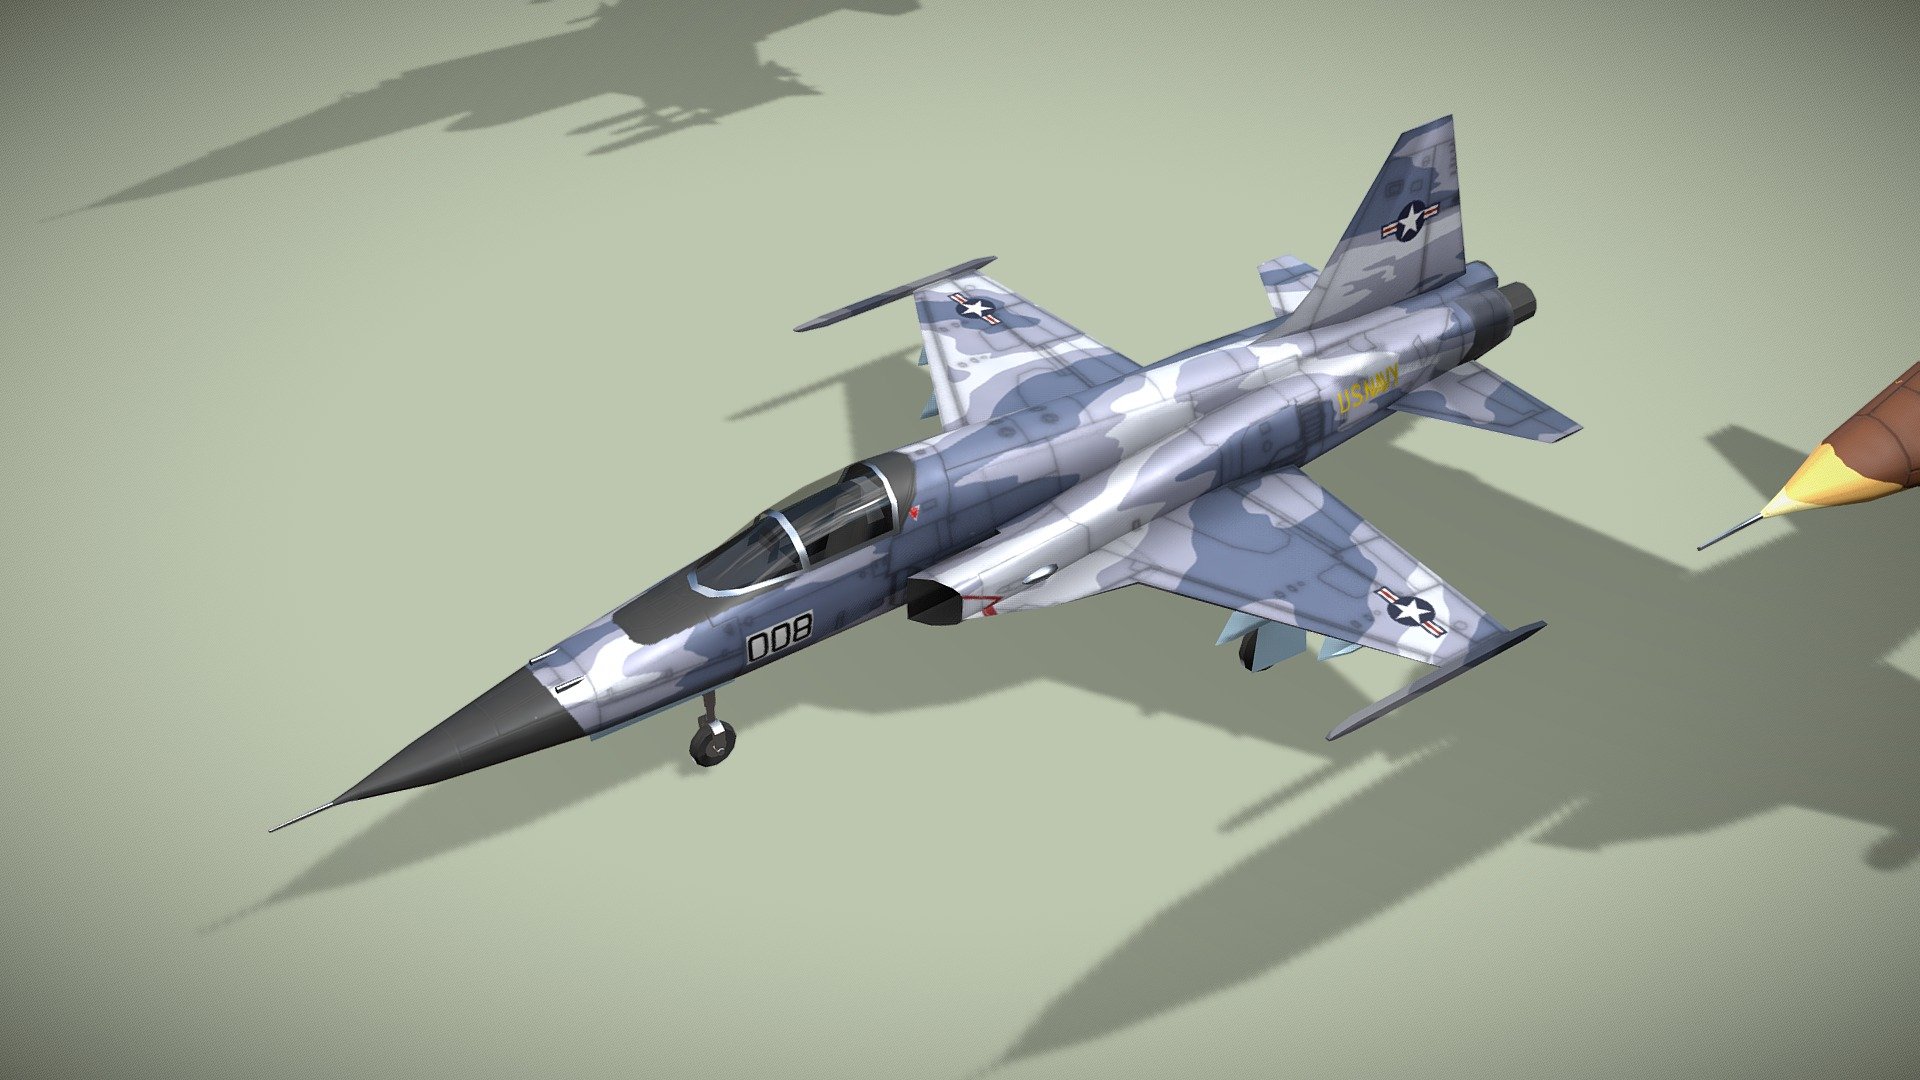 Northrop F-5 Tiger/Freedom fighter

Lowpoly model of american coldwar jet fighter



Northrop F-5 is supersonic light fighter aircraft initially designed as a privately funded project in the late 1950s by Northrop Corporation. The design team wrapped a small, highly aerodynamic fighter around two compact and high-thrust General Electric J85 engines, focusing on performance and a low cost of maintenance. Though primarily designed for a day air superiority role, the aircraft is also a capable ground-attack platform. The F-5A entered service in the early 1960s. During the Cold War, over 800 were produced through 1972 for U.S. allies. The F-5 was also developed into a dedicated reconnaissance aircraft, the RF-5 Tigereye.



1 standing version and 2 flying versions in set.

Model has bump map, roughness map and 3 x diffuse textures.



Check also my other aircrafts and cars

Patreon with monthly free model - Northrop F-5 Tiger - Buy Royalty Free 3D model by NETRUNNER_pl 3d model